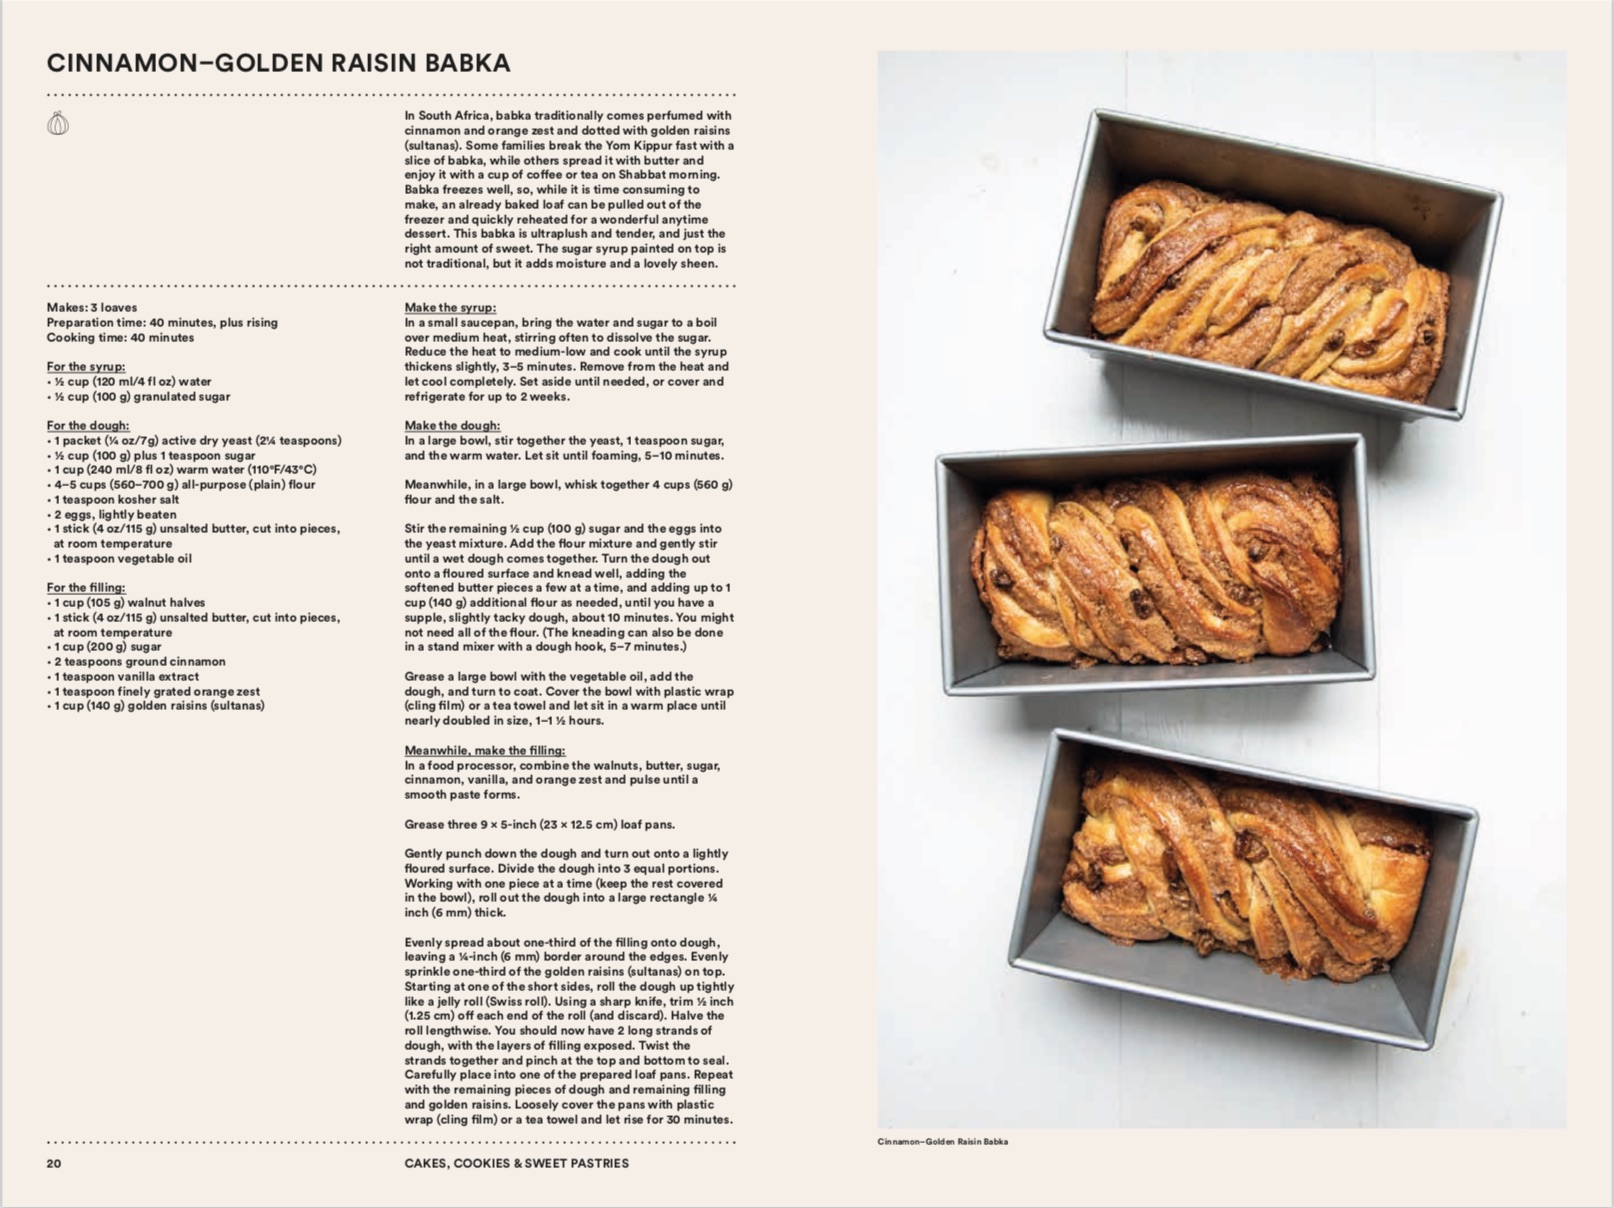 From The Jewish Cookbook copyright Phaidon 2019